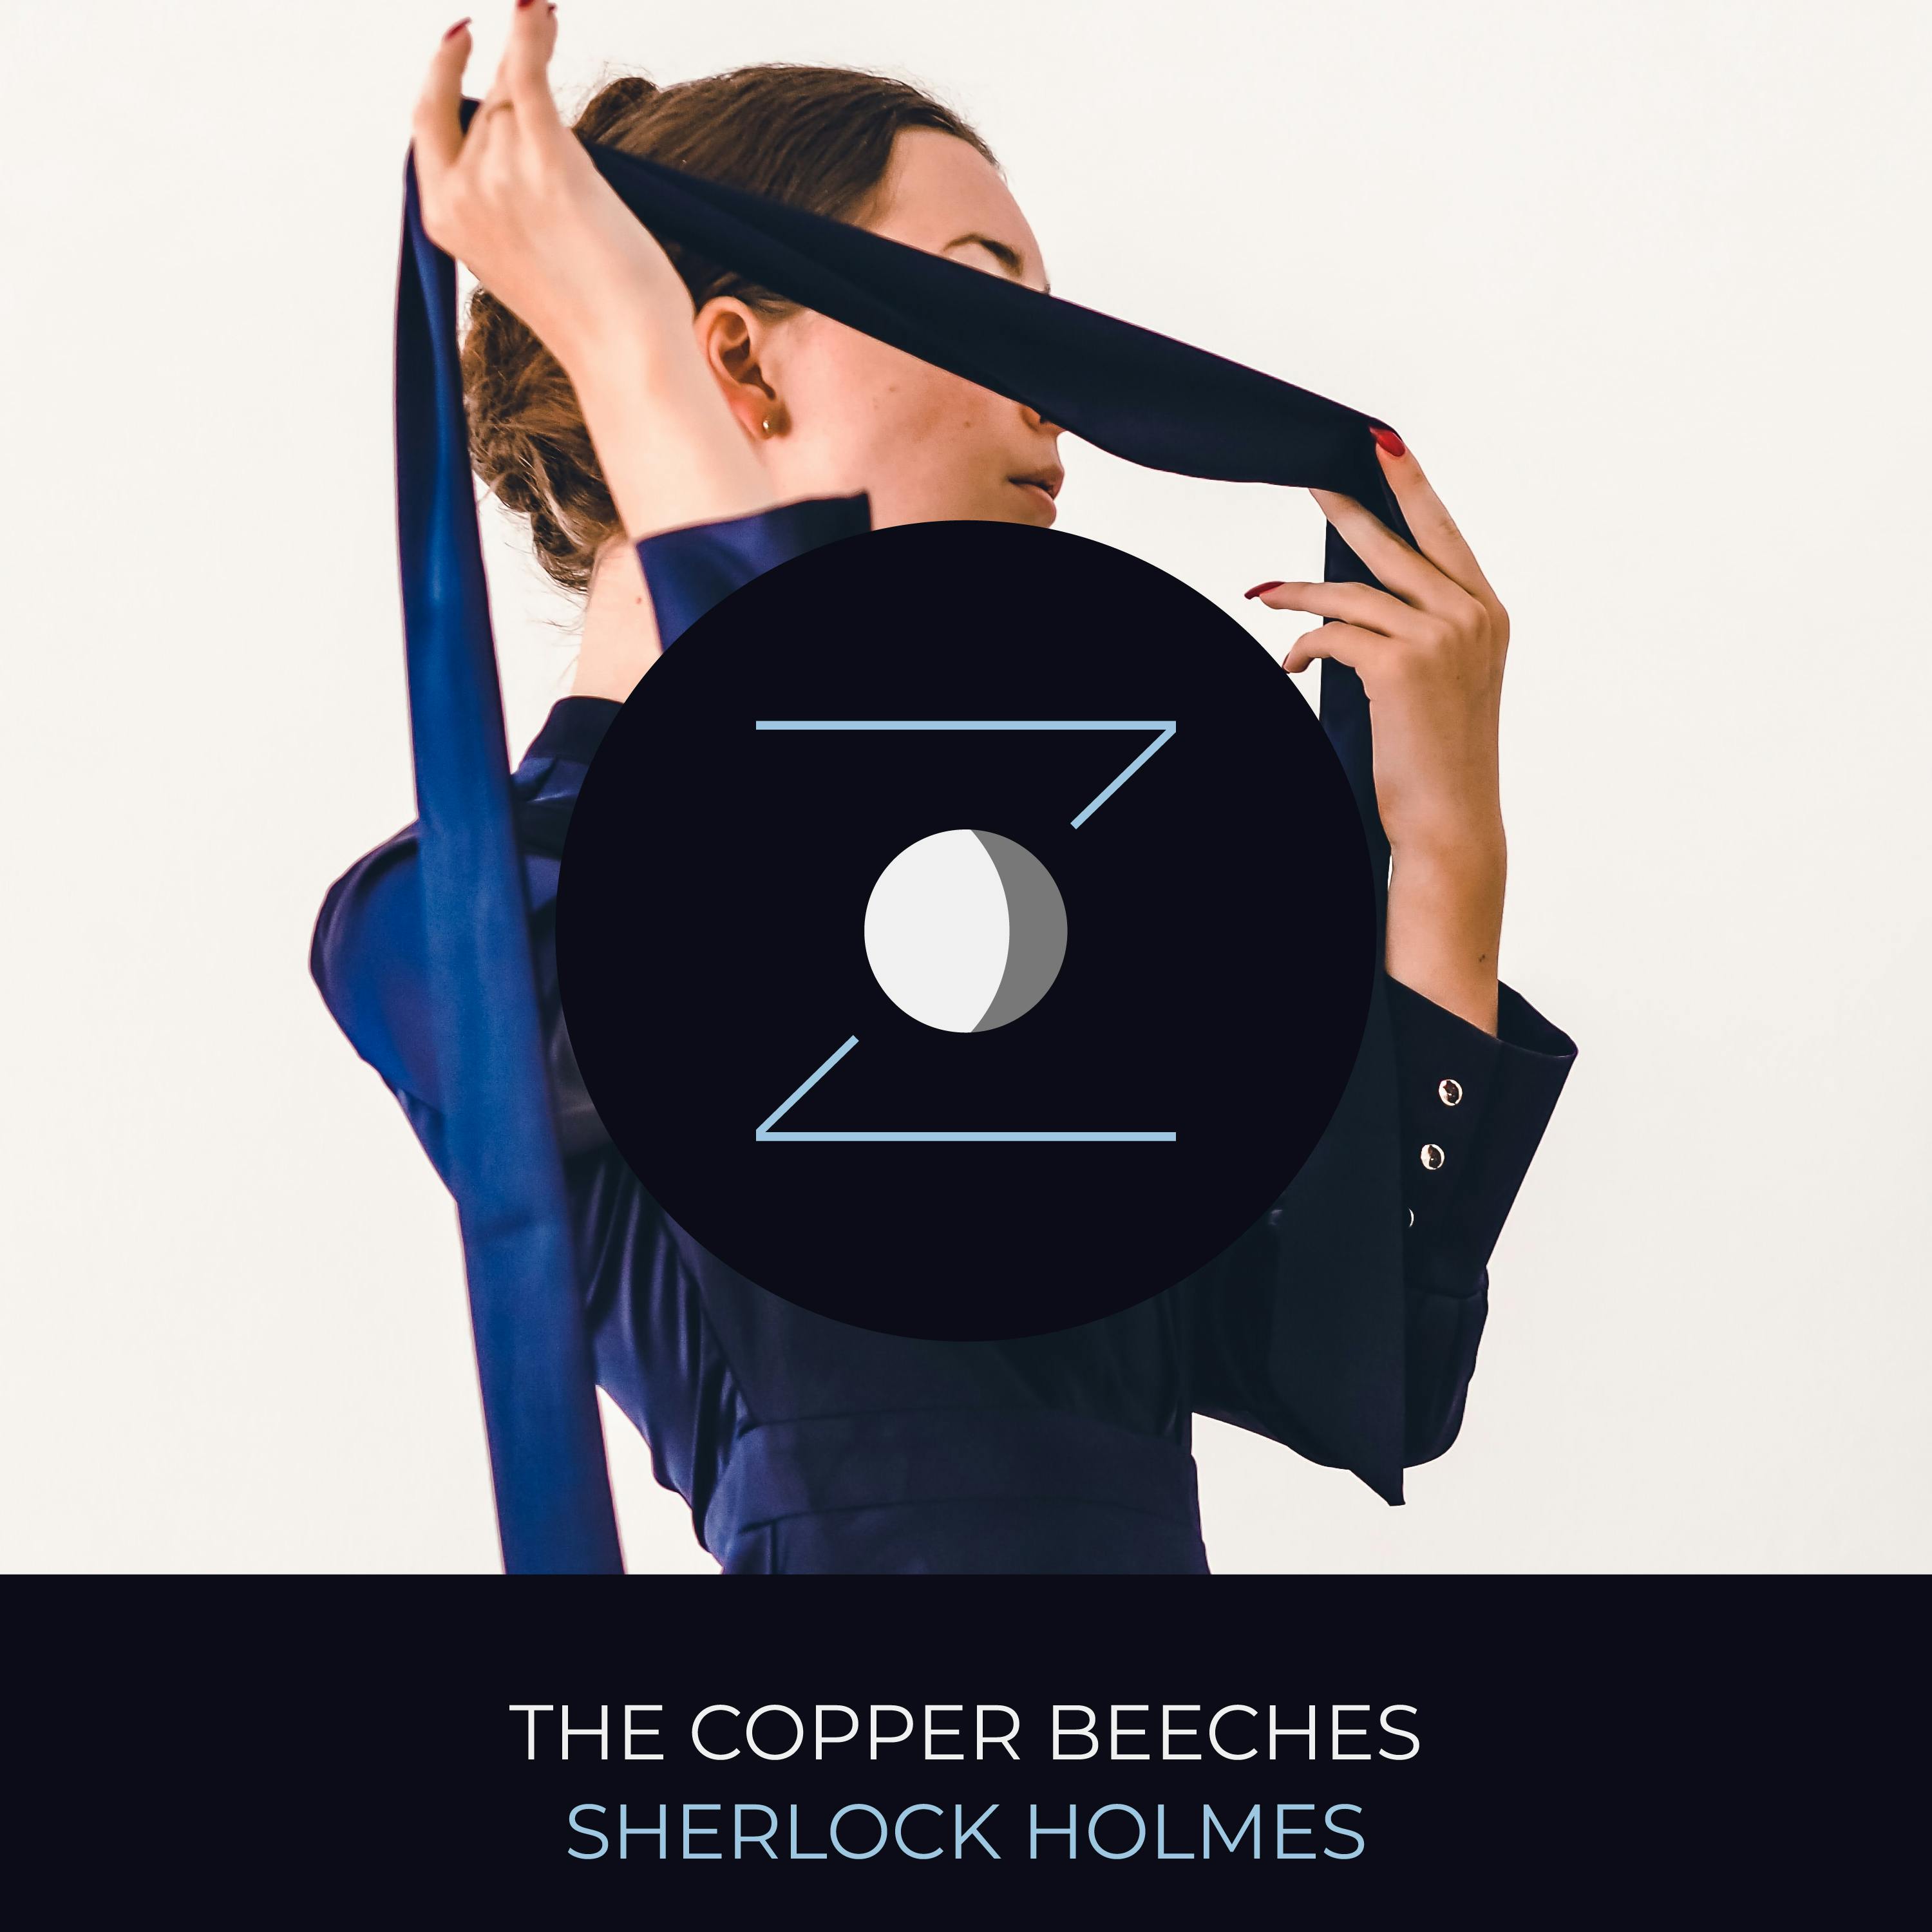 The Copper Beeches | Sherlock Holmes